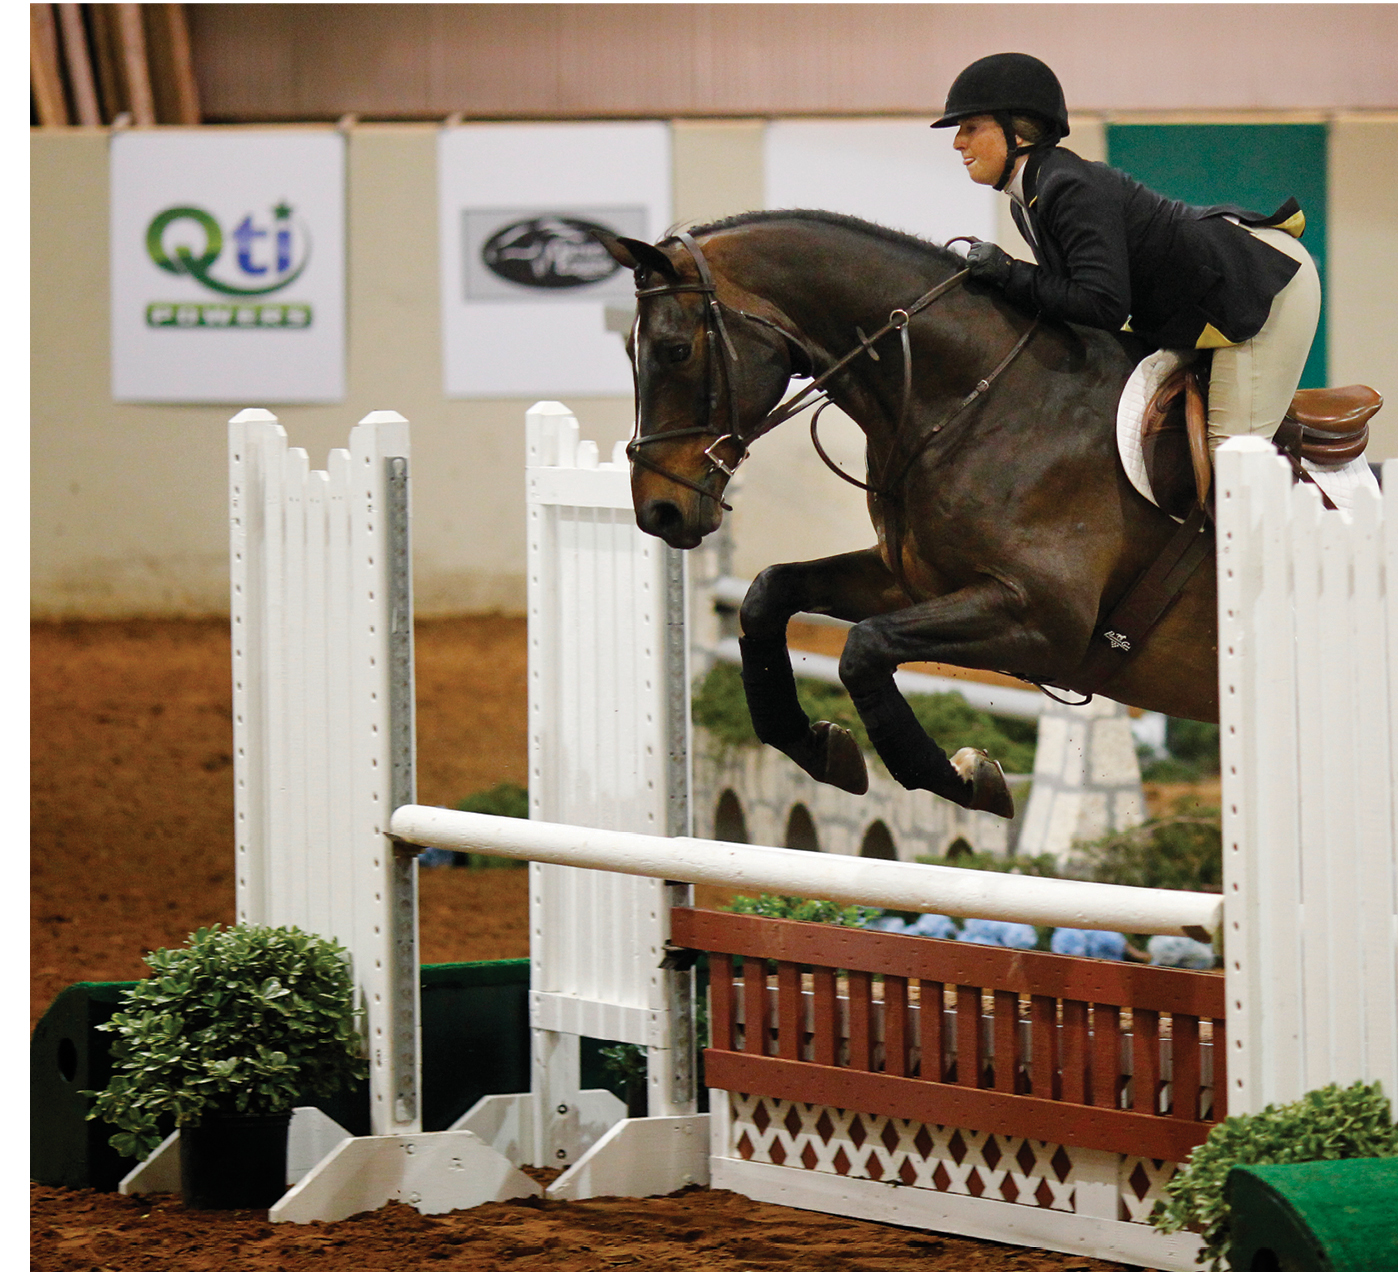 6 things you should know about Baylor Equestrian | Baylor Magazine, Summer 2012 ...